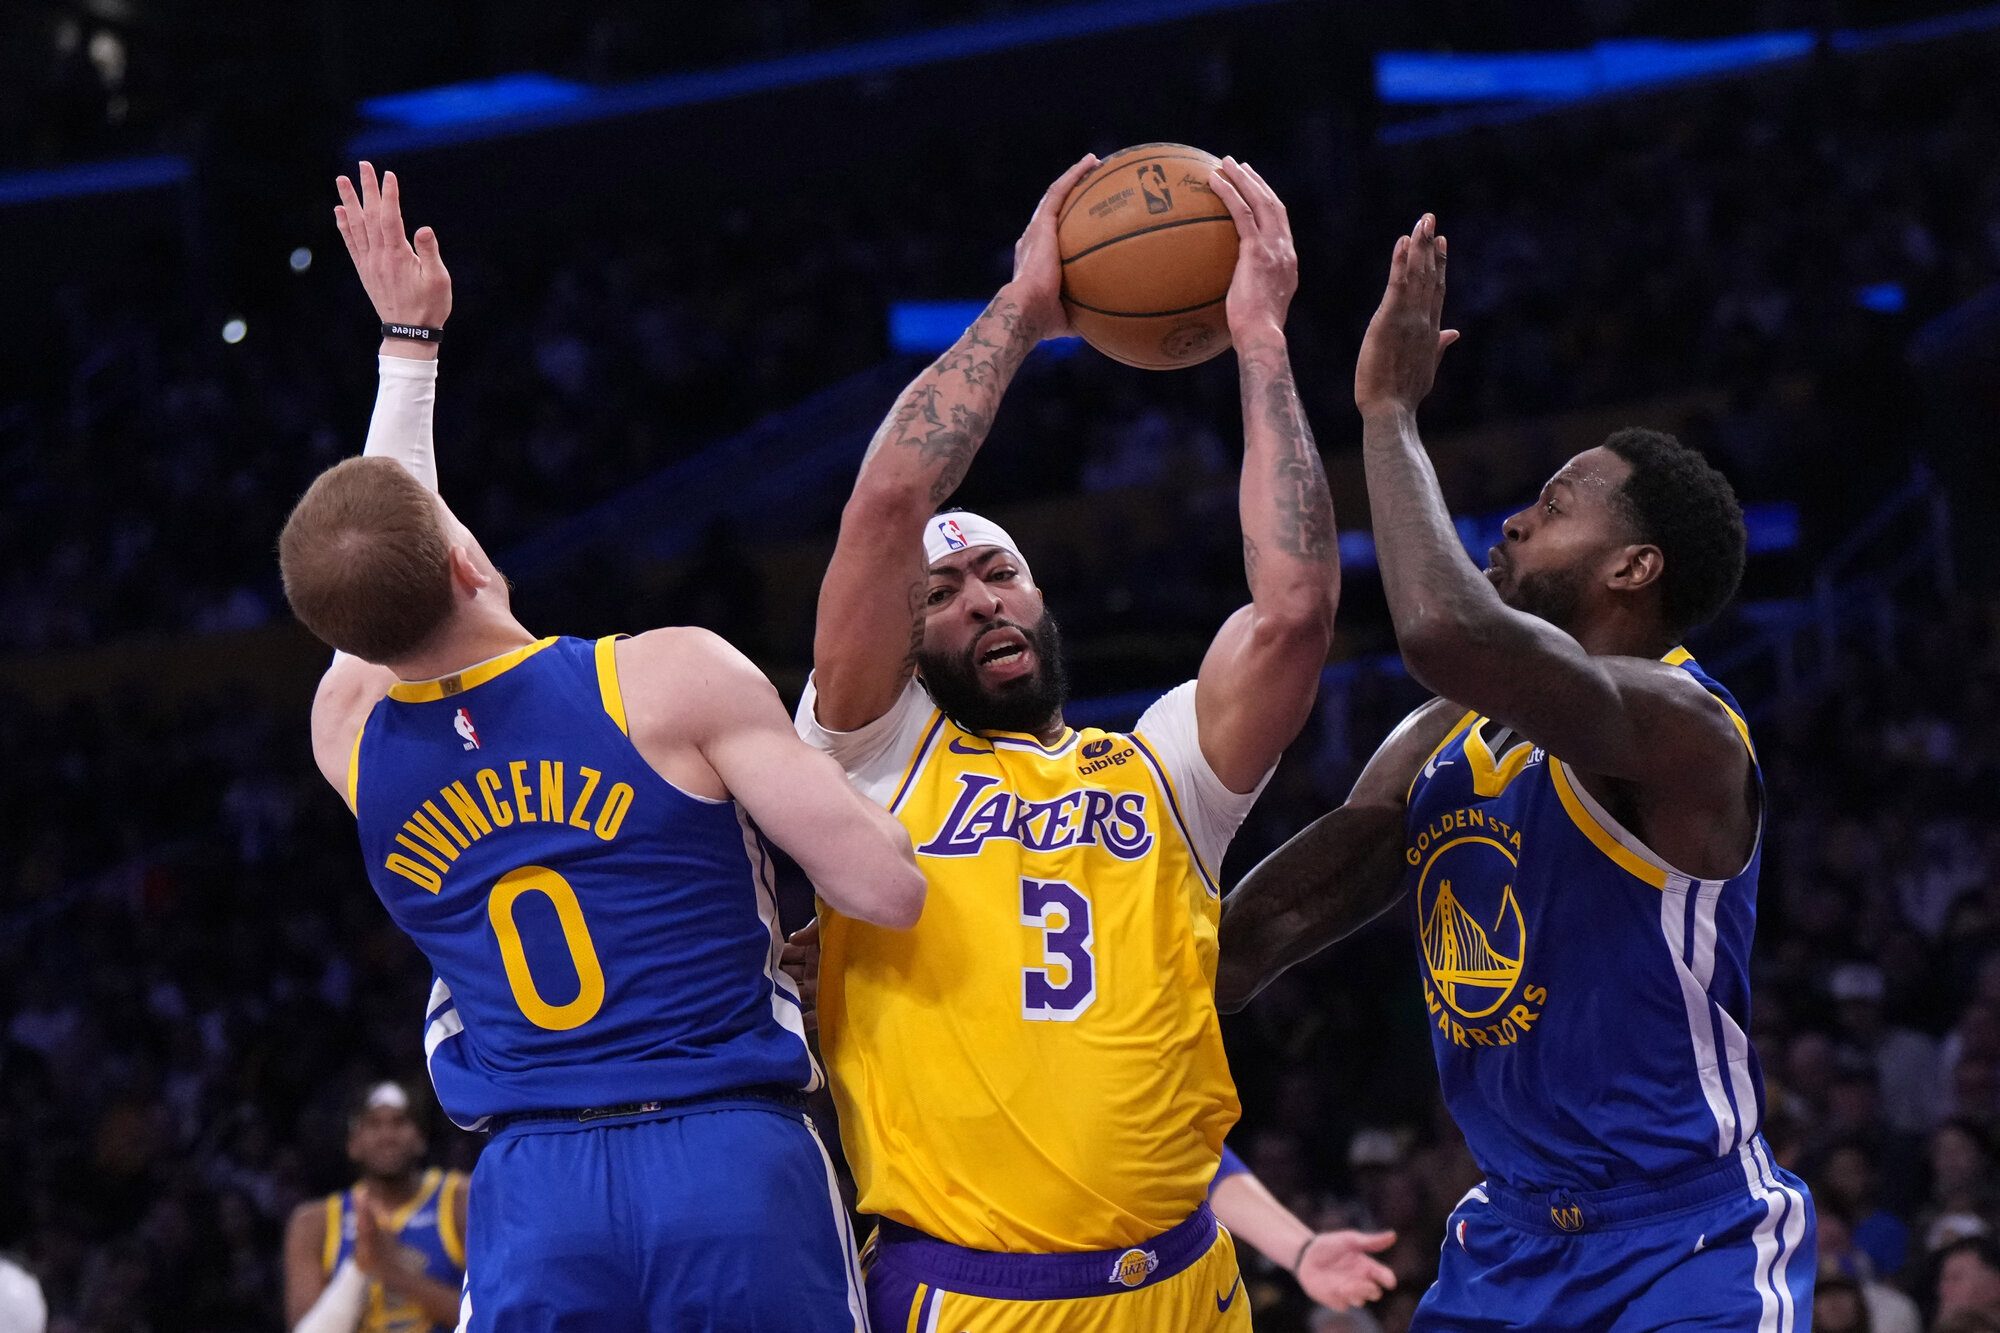 Lonnie Walker IV’s late heroics lift Lakers over Warriors